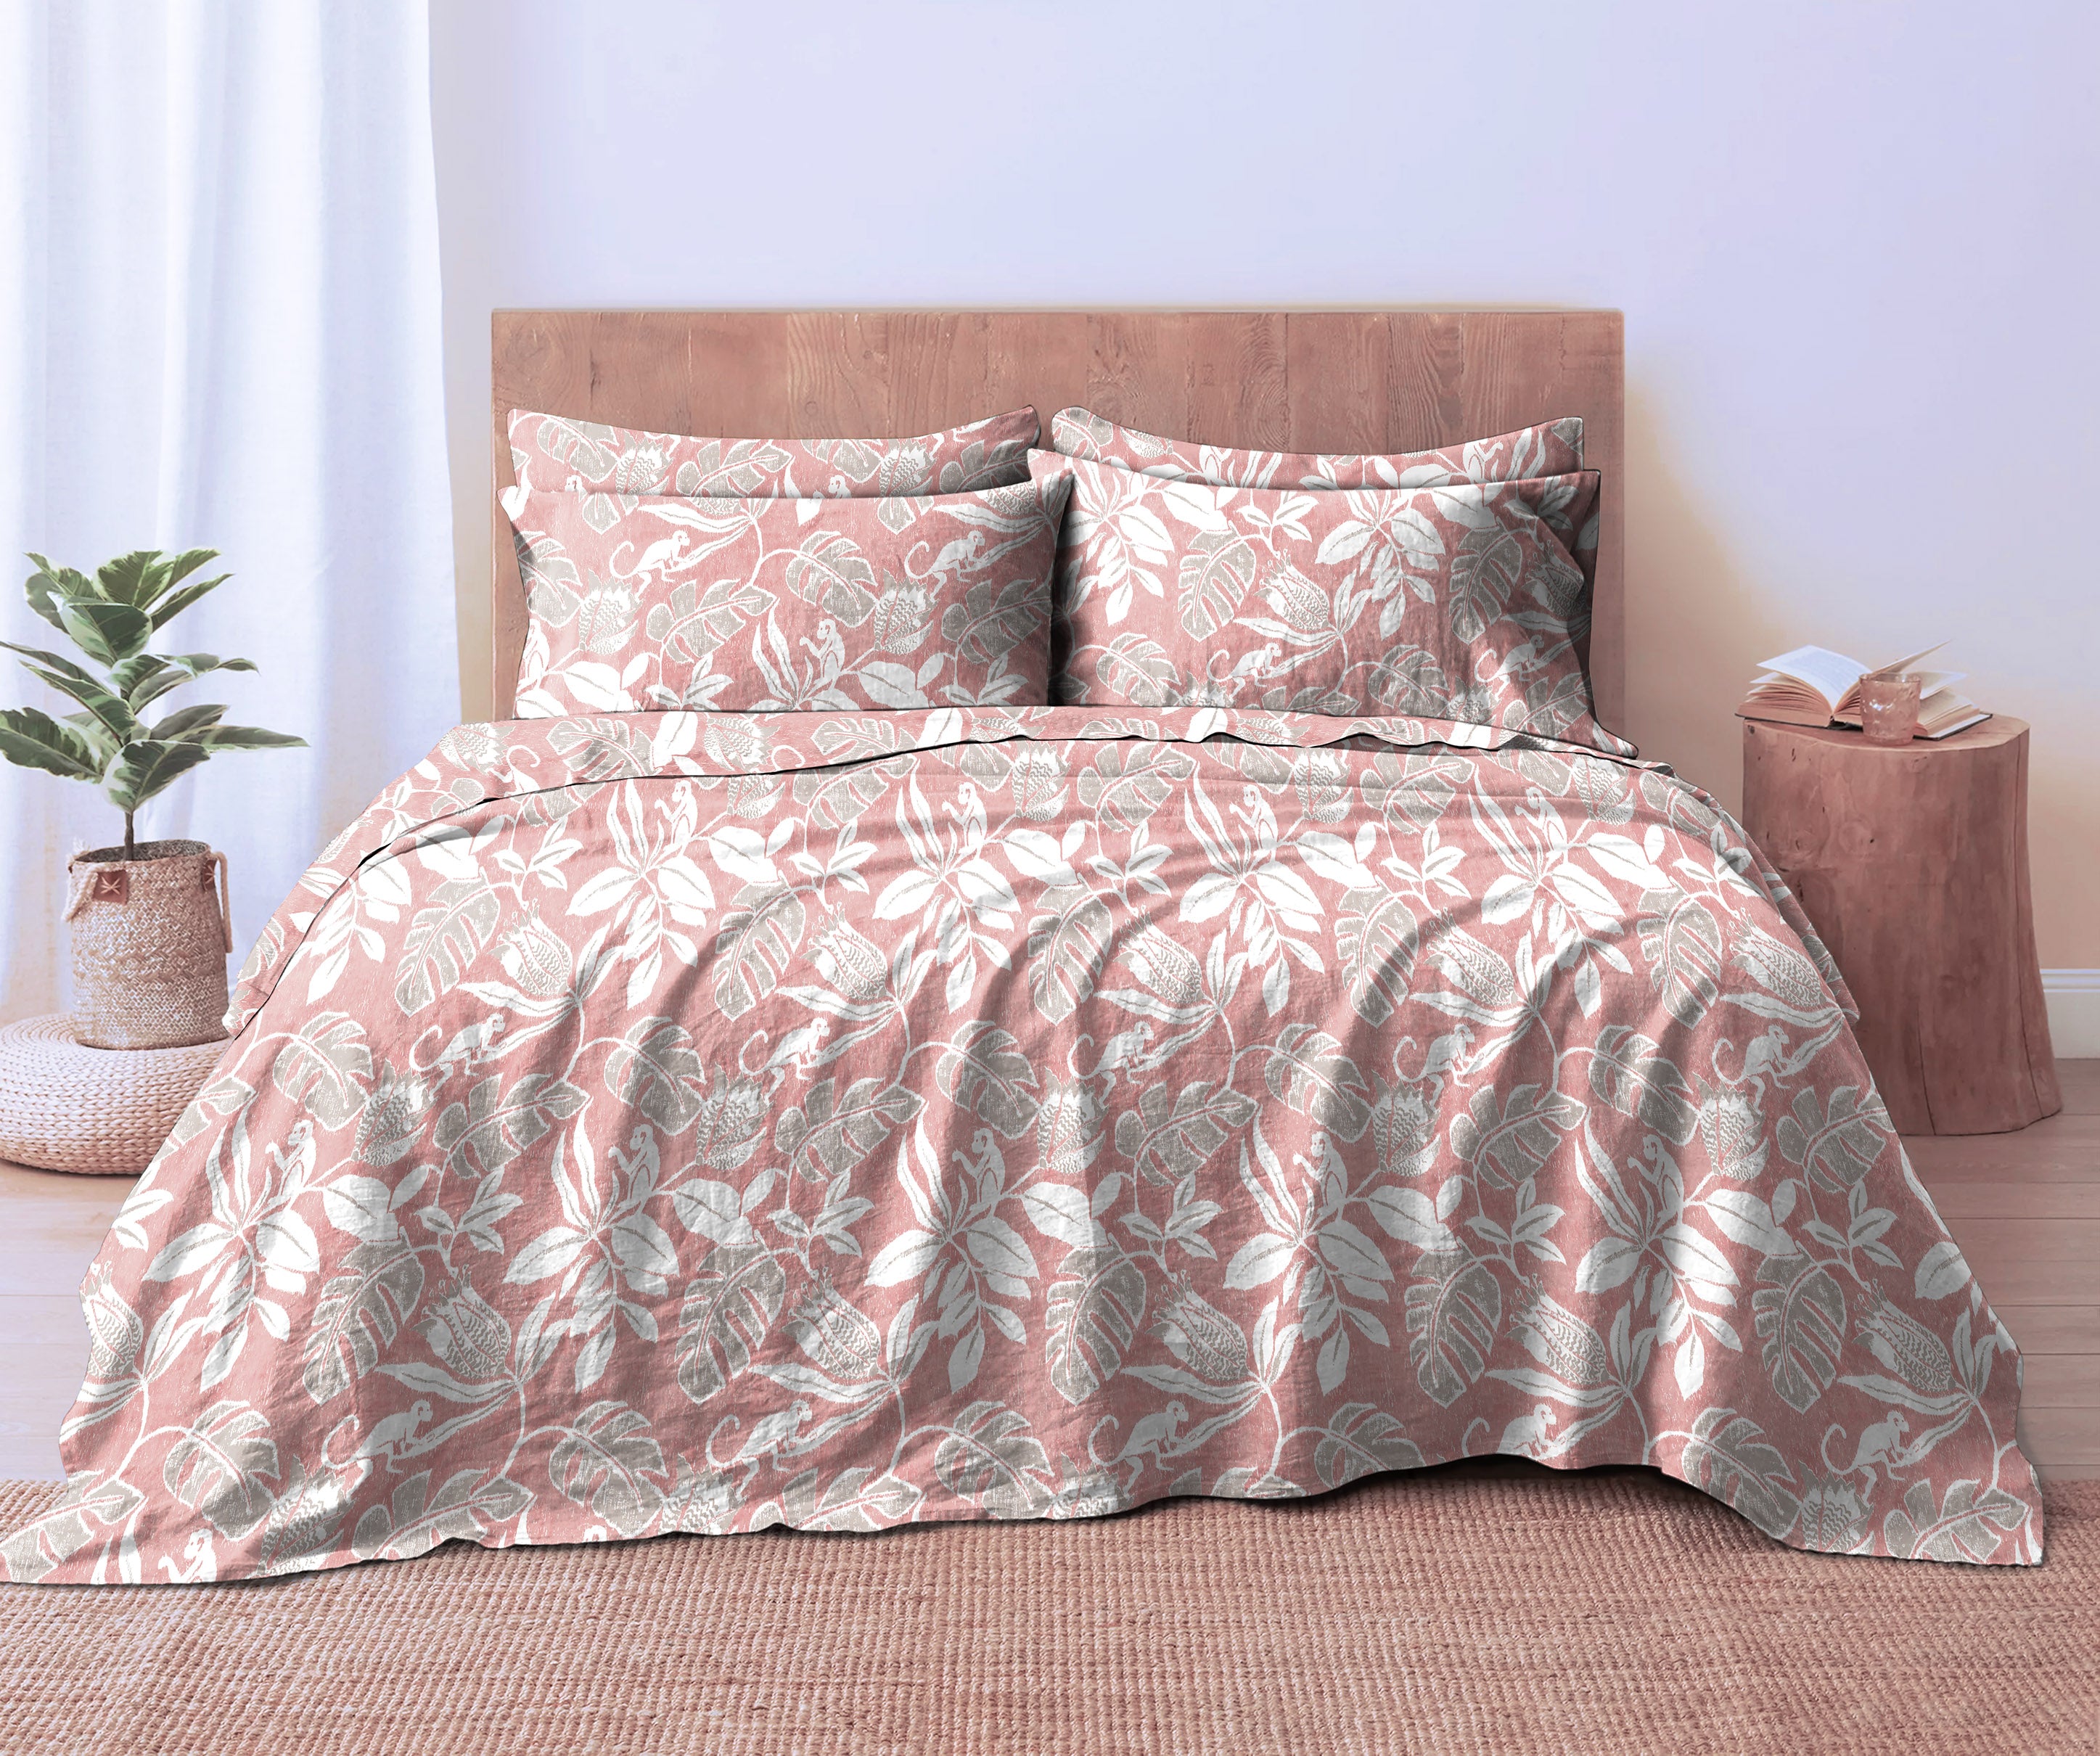 SAVANNA PINK BEDCOVER FOR DOUBLE BED WITH 2 PILLOWCOVERS KING SIZE (104" X 90")